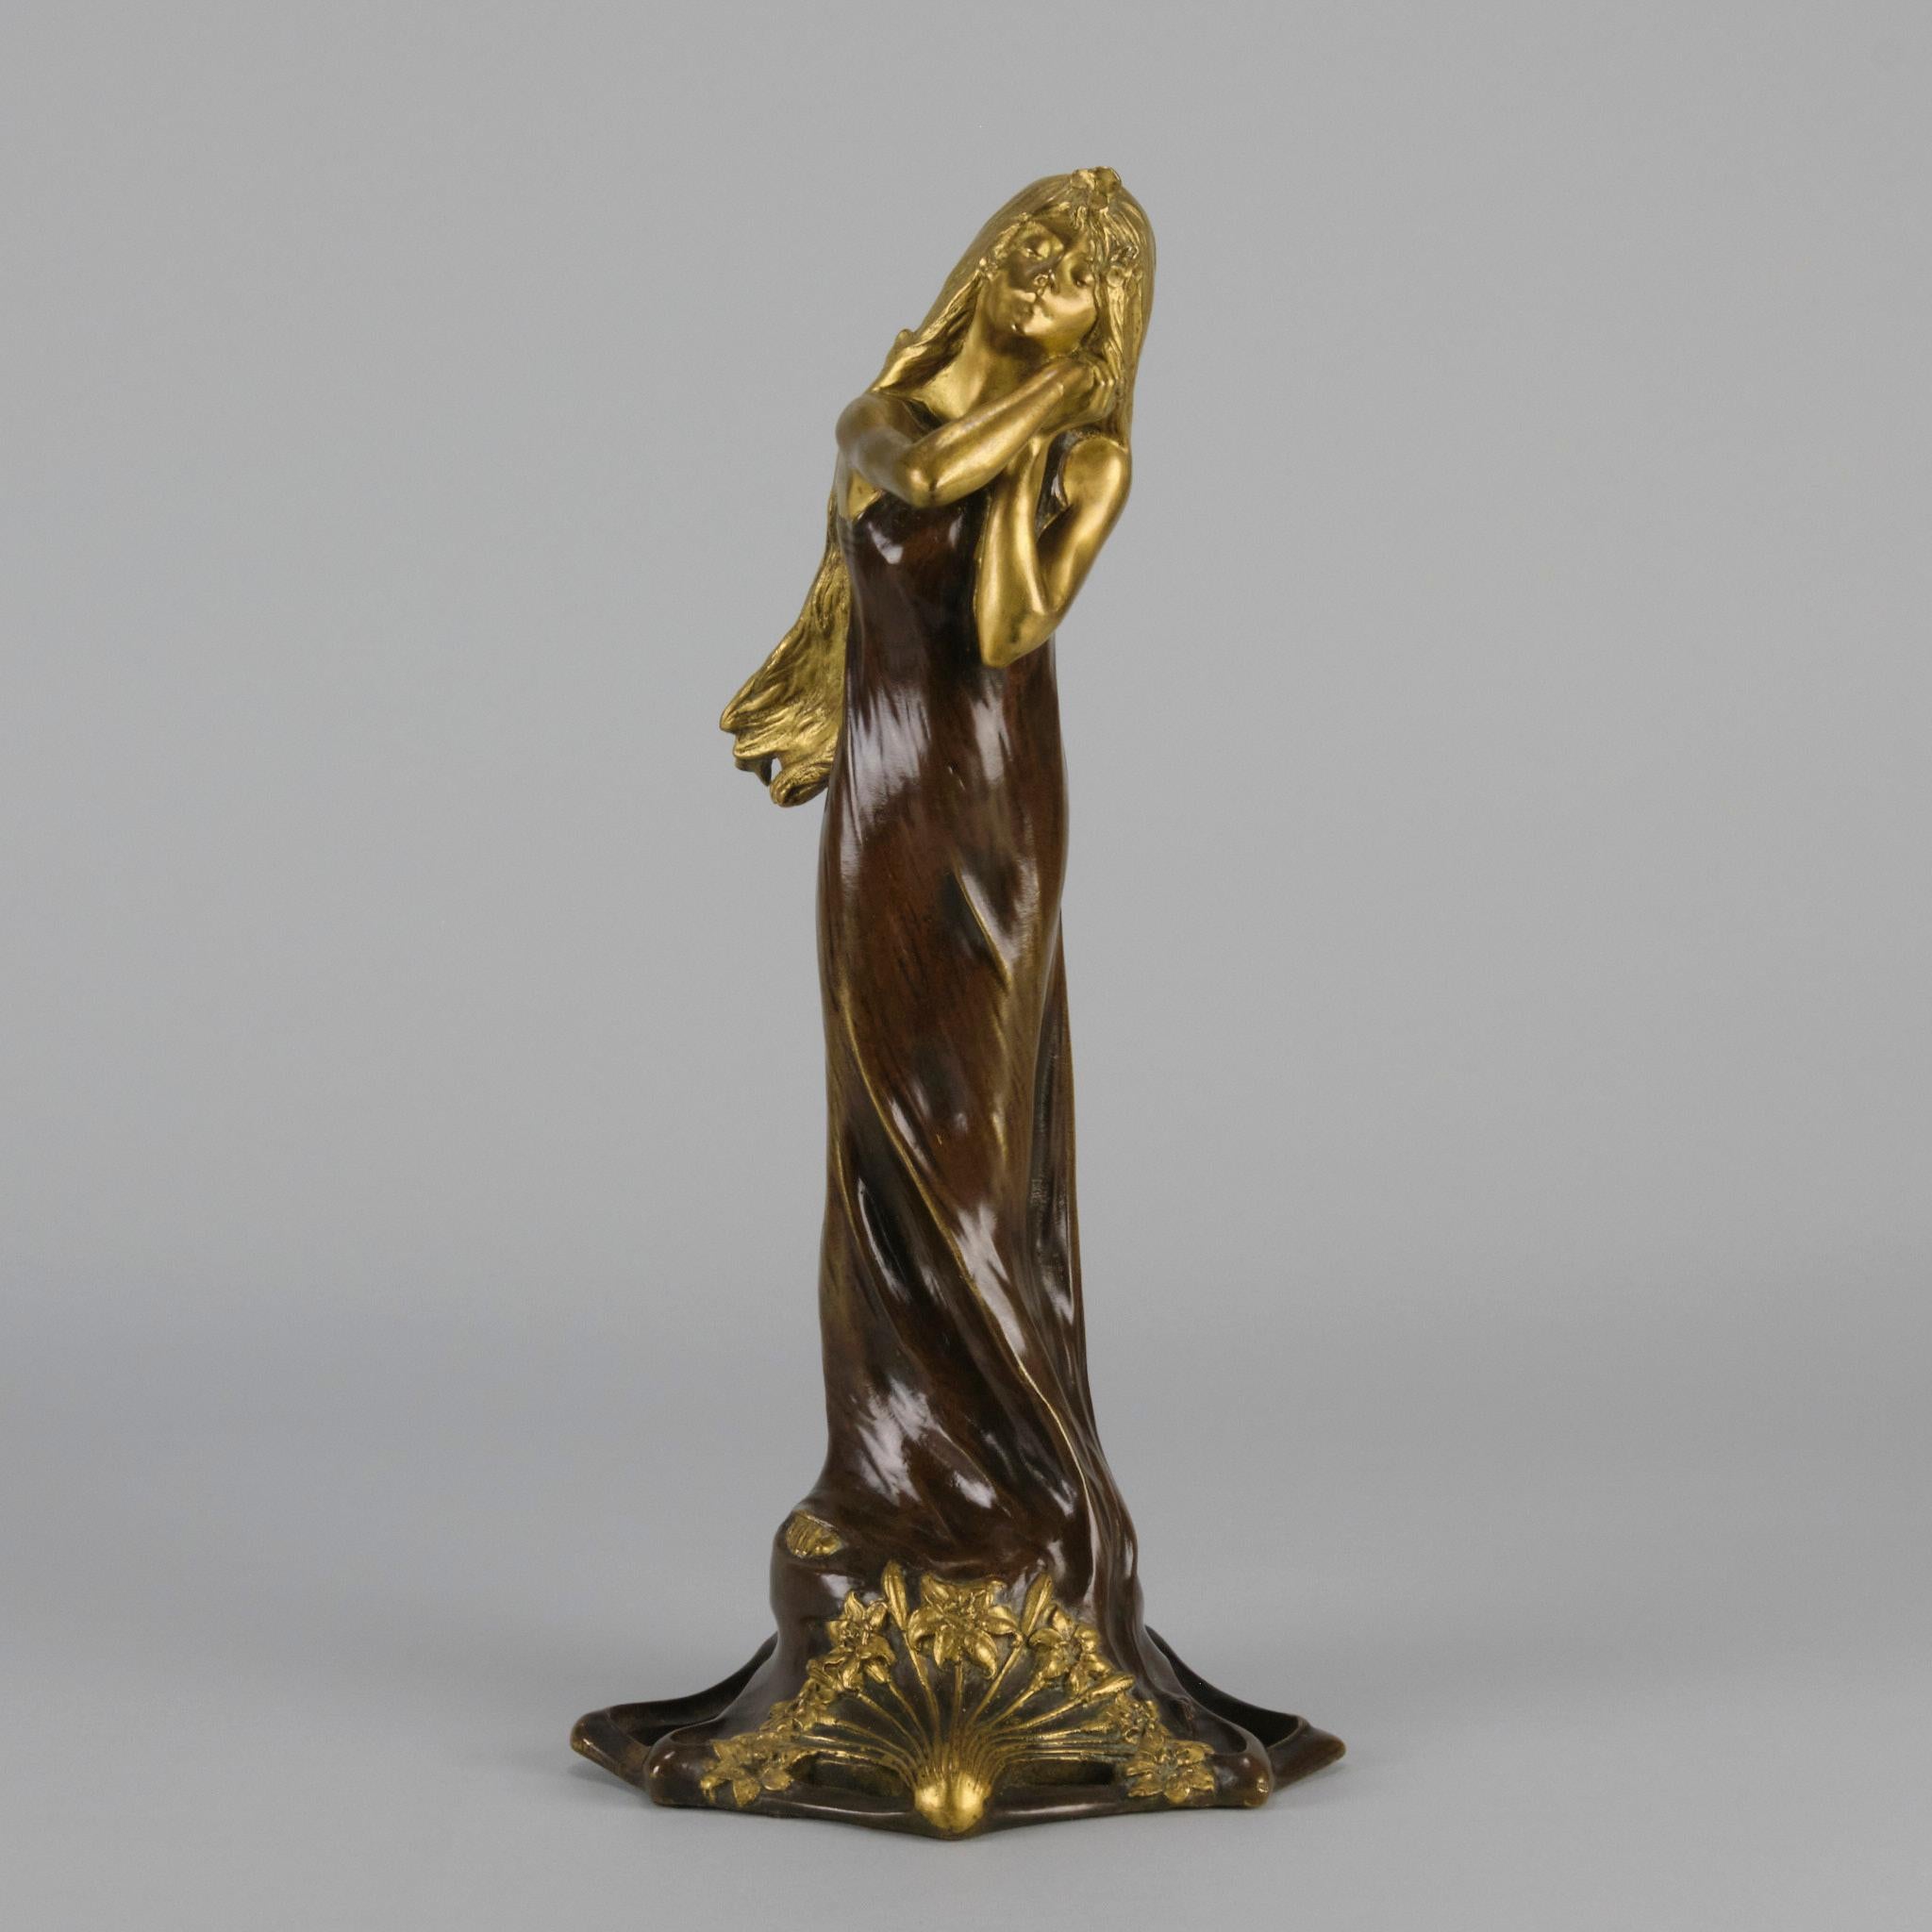 A very fine Art Nouveau bronze study of a young beauty in coy pose, clothed in a long flowing skirt, her head and arms in gilt bronze to contrast with the rich brown colour of her clothes. The surface of the bronze with excellent hand chased surface